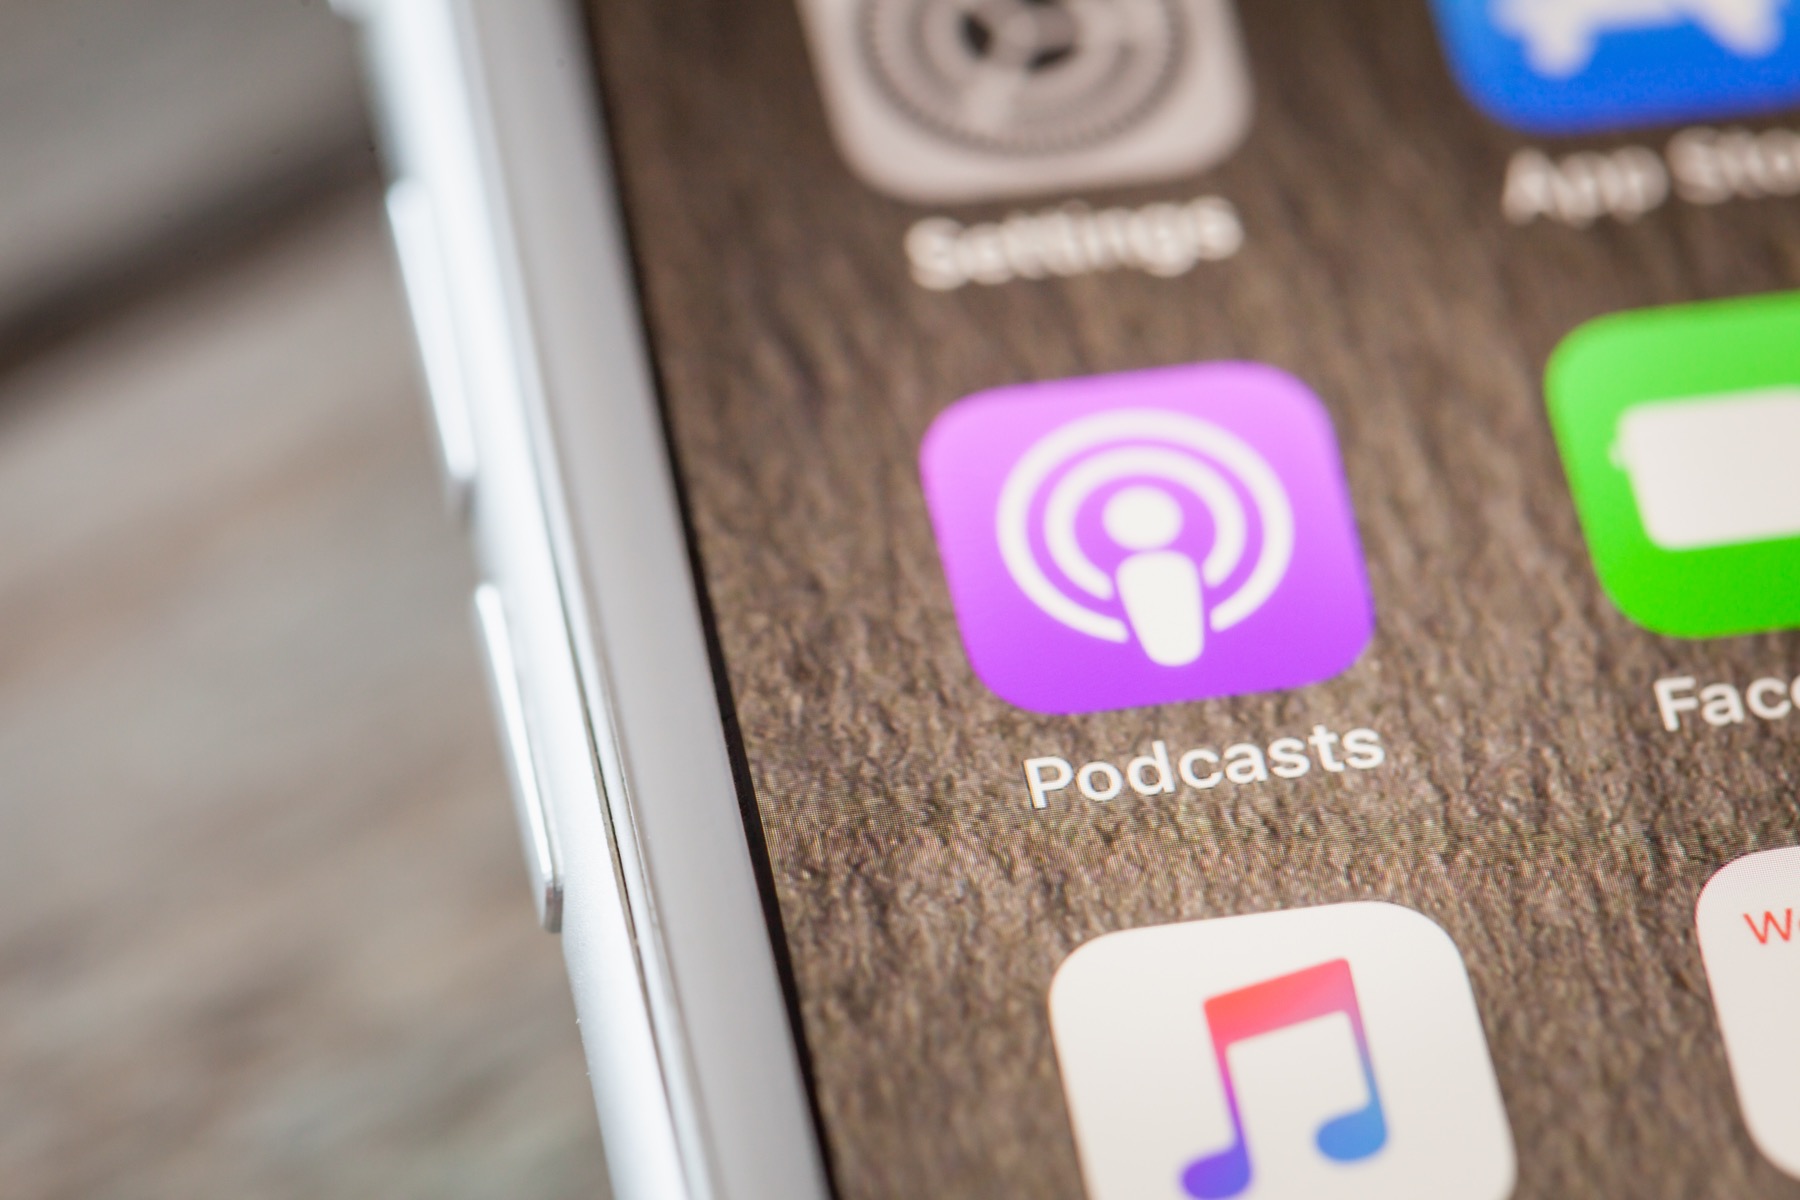 Apple may adopt new metric to analyze habits of podcast listeners